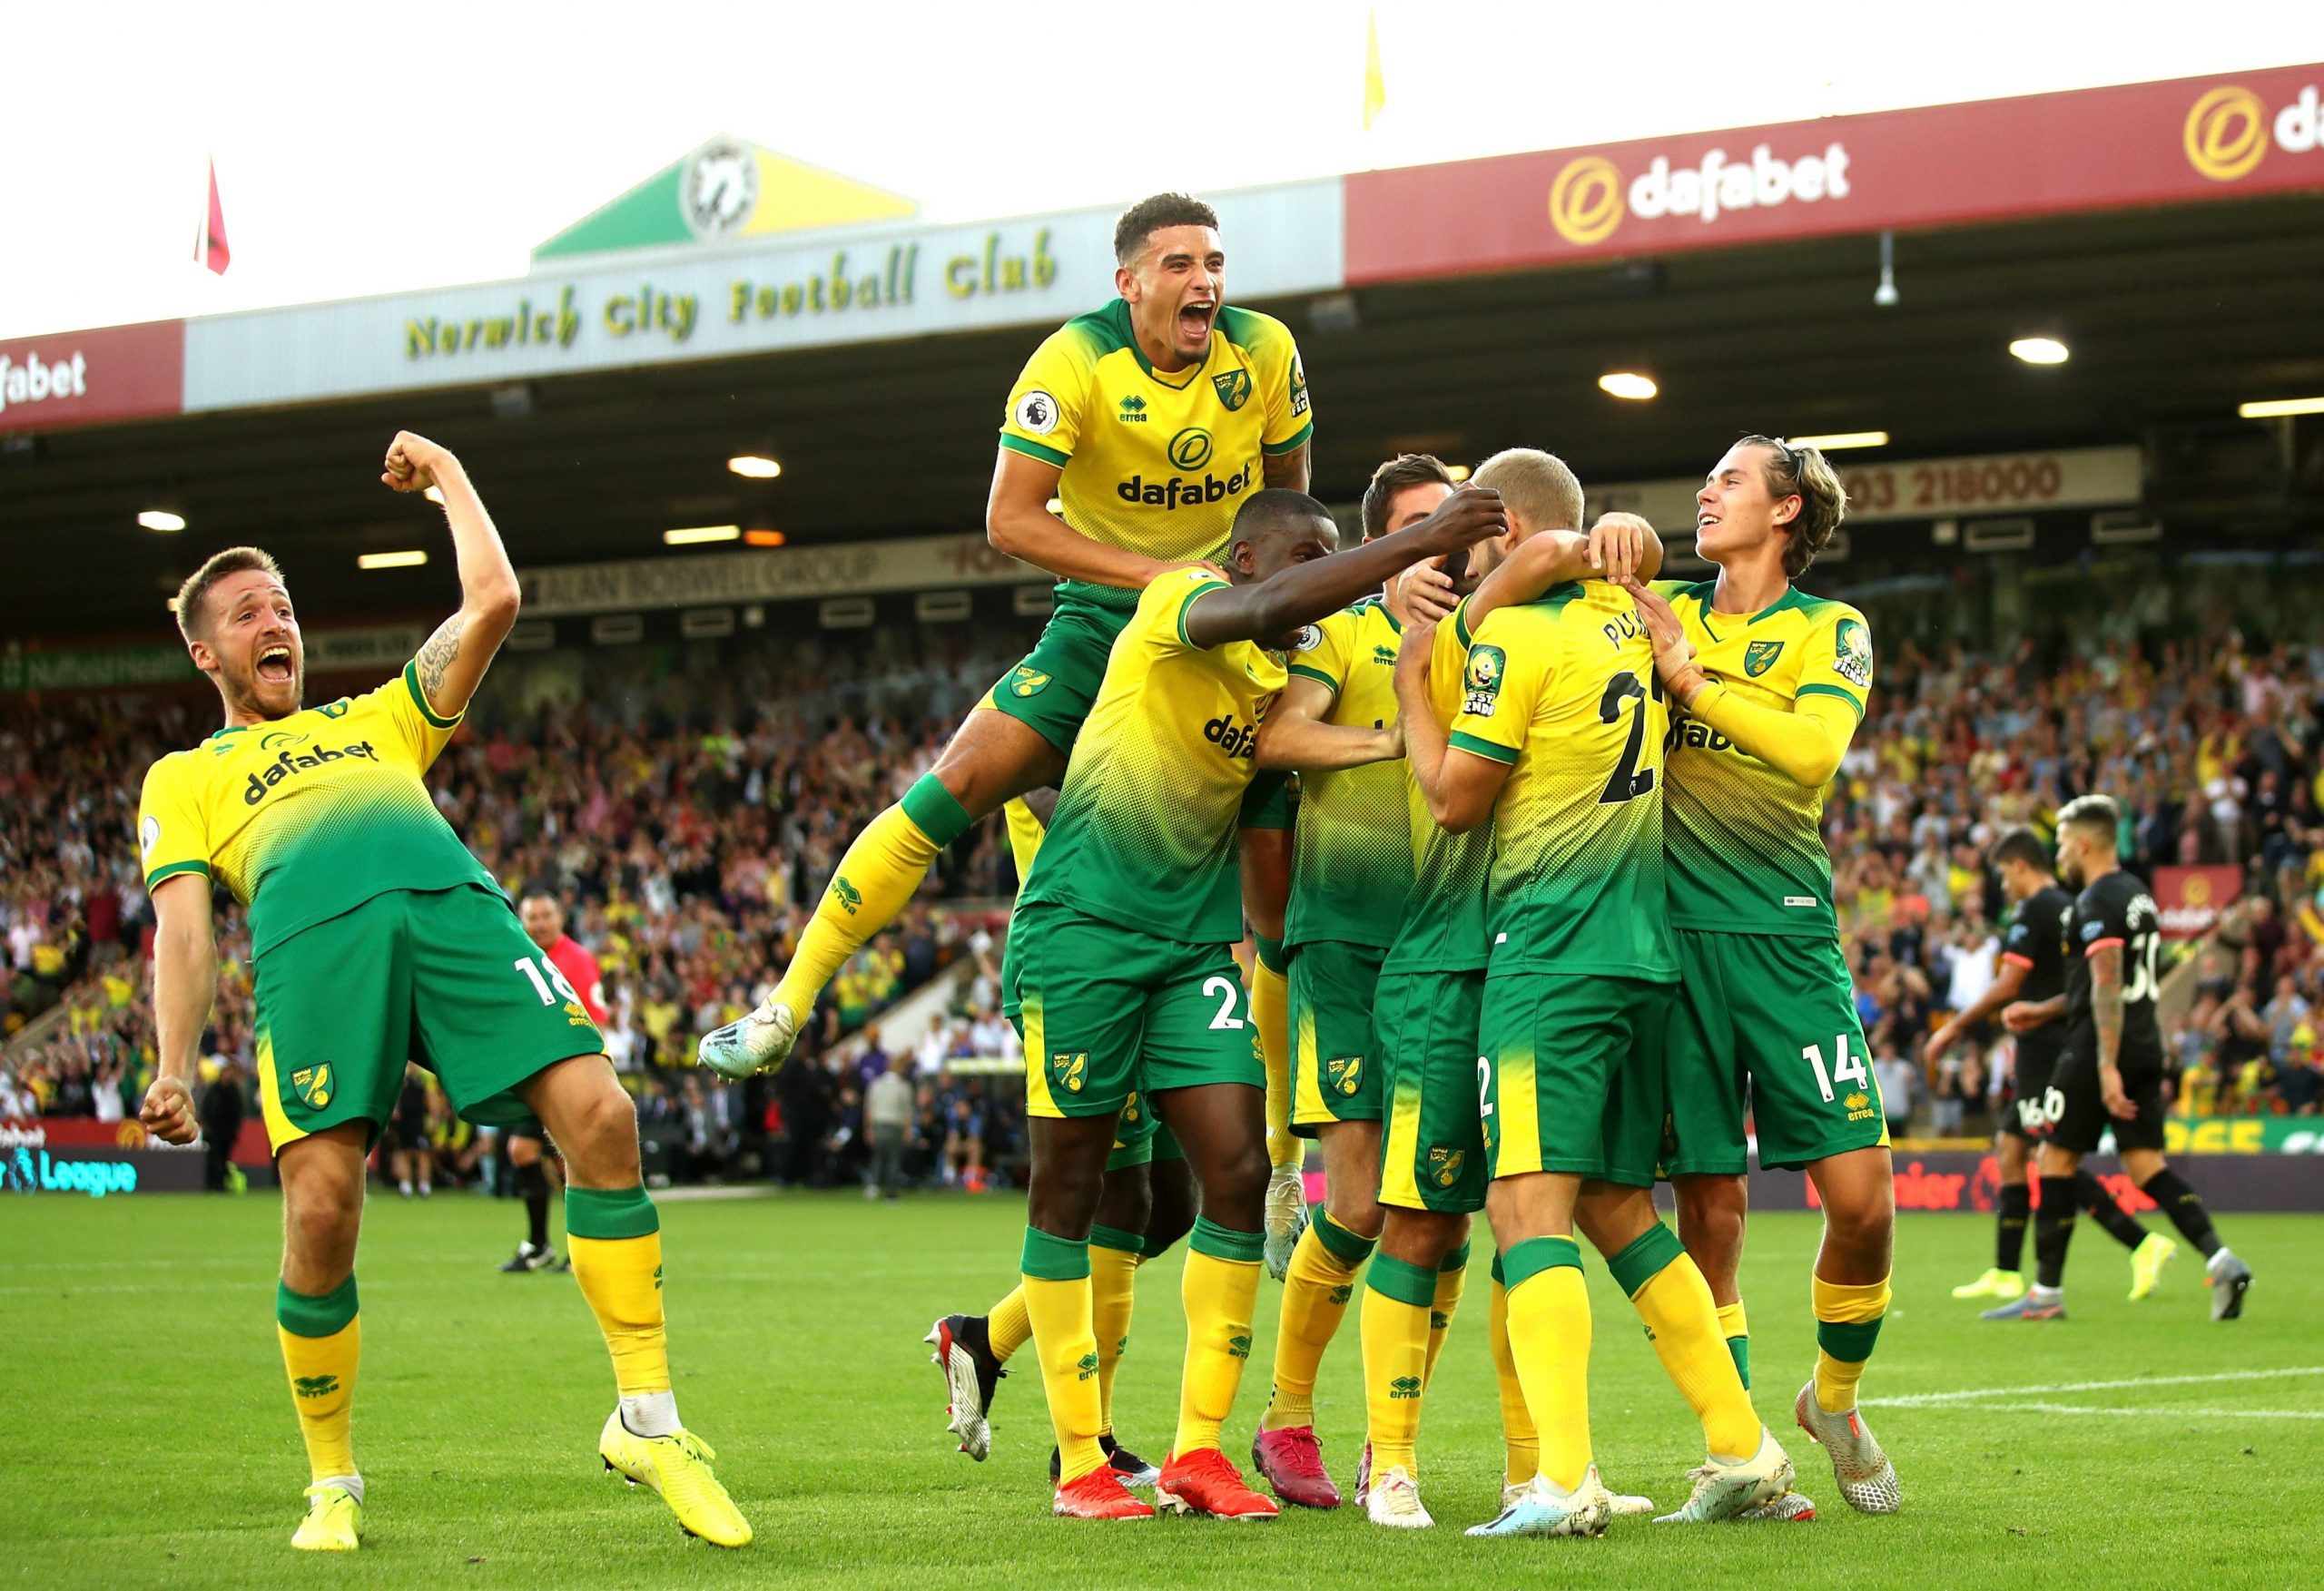 Norwich stun high-flying Leicester 1-0